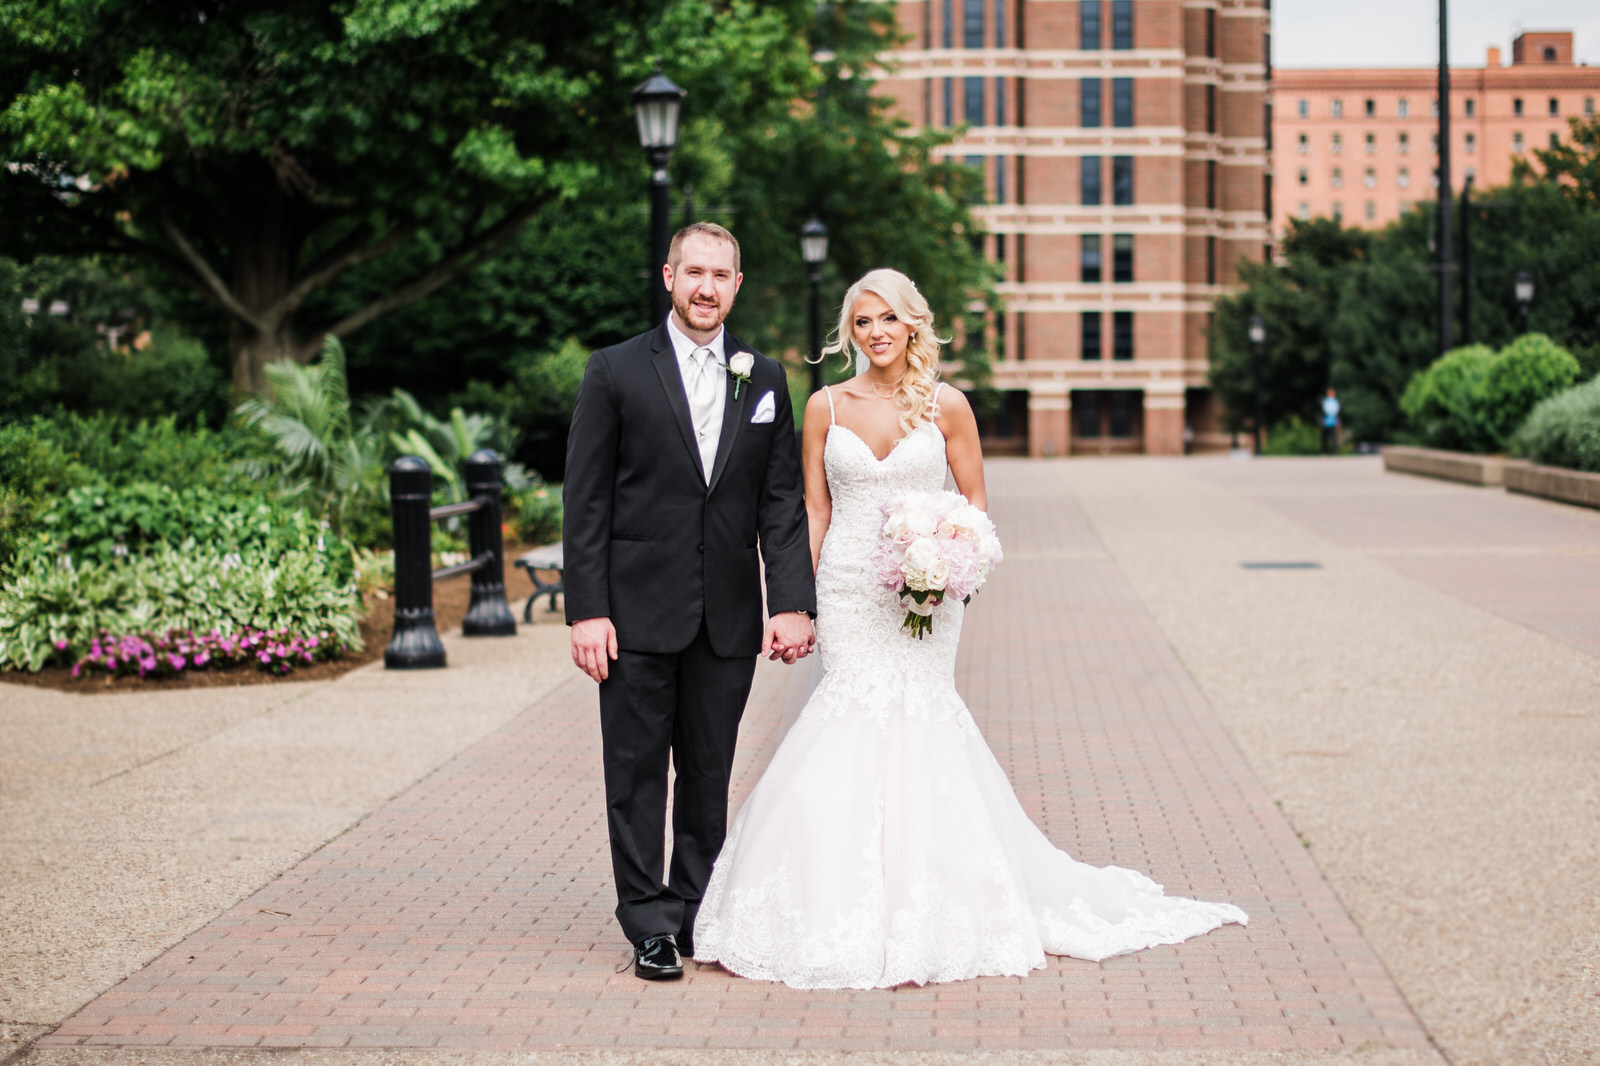  The bride and groom stopped for a posed shot at Duquesne University on the day of their wedding. 